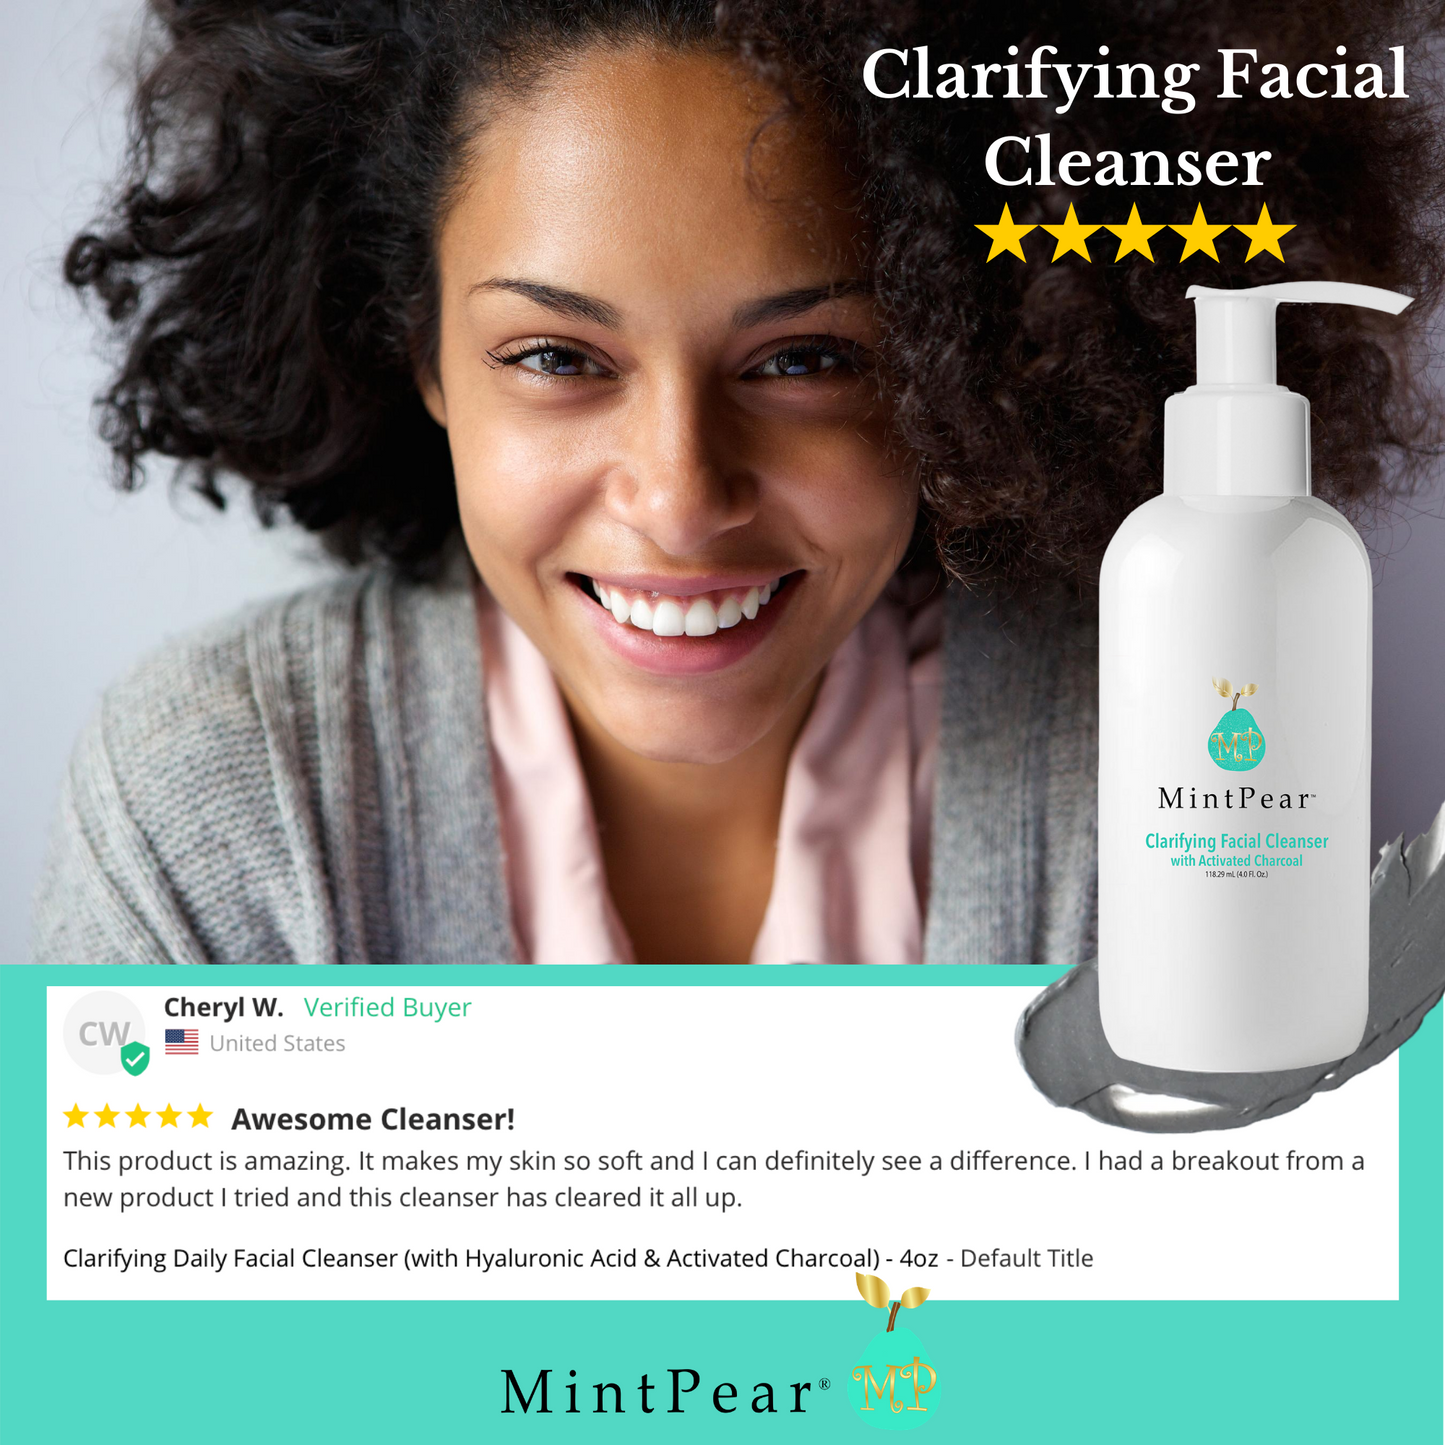 Clarifying Daily Facial Cleanser (with Hyaluronic Acid & Activated Charcoal)